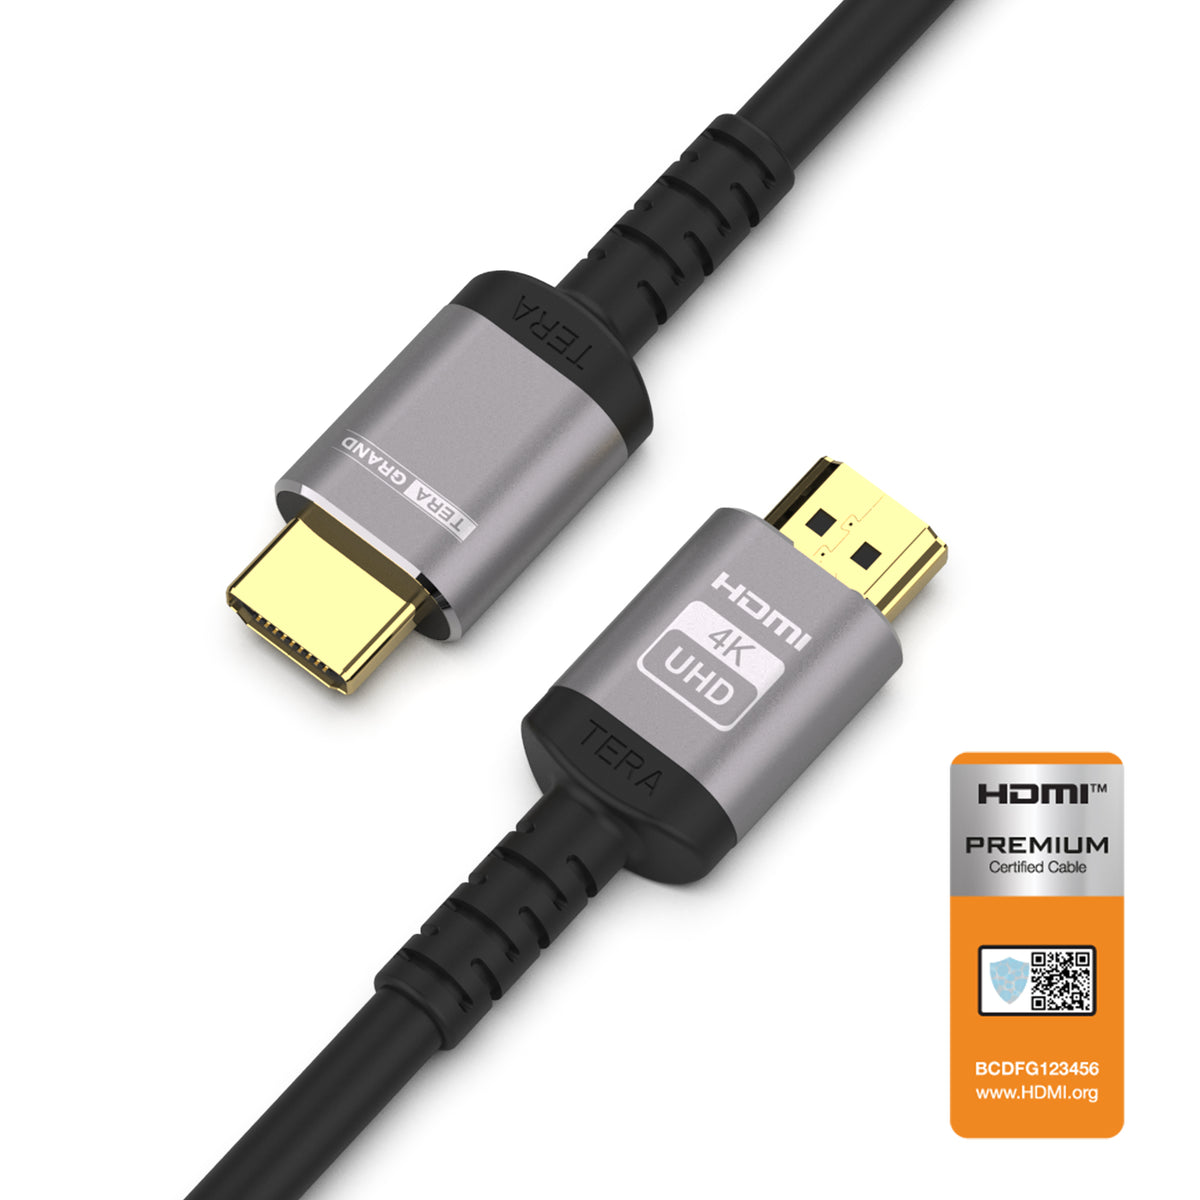 4K Premium HDMI Certified Cable with Aluminum housing, Supports